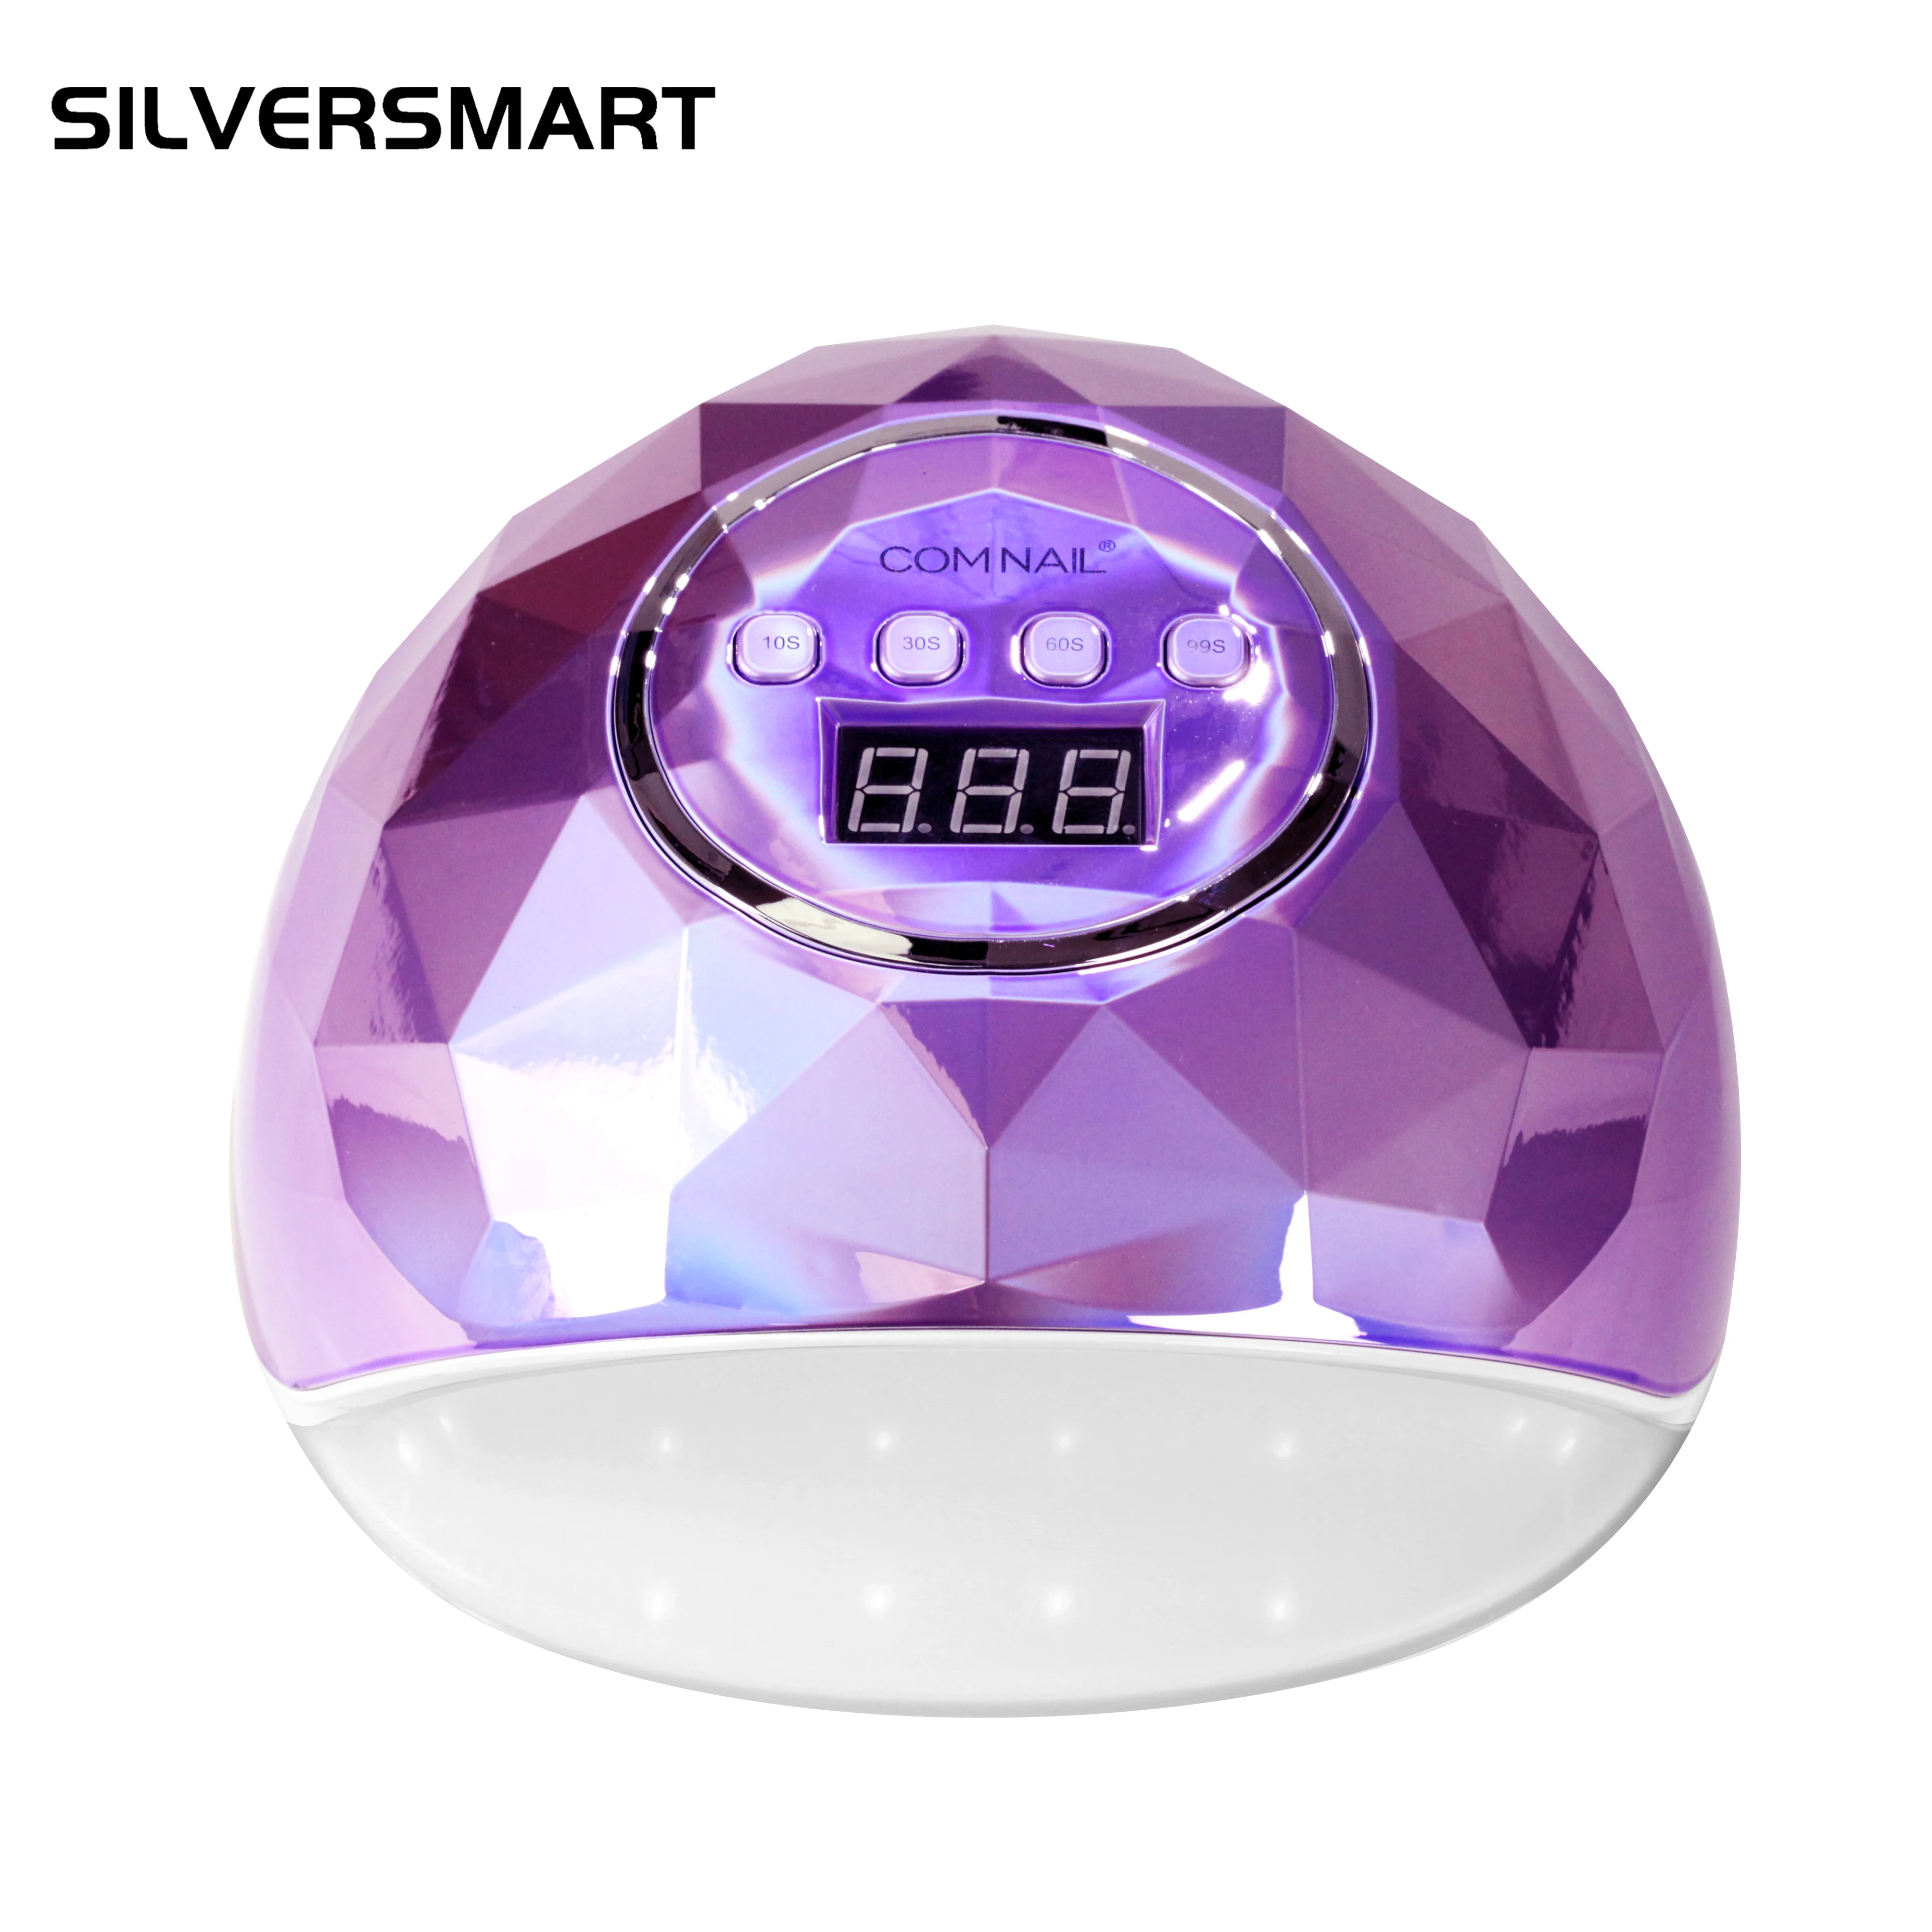 

86W UV Lamp Manicure Pro LED Gel Fast Curing Polish Ice Nail Dryer, Pink/silver/purple